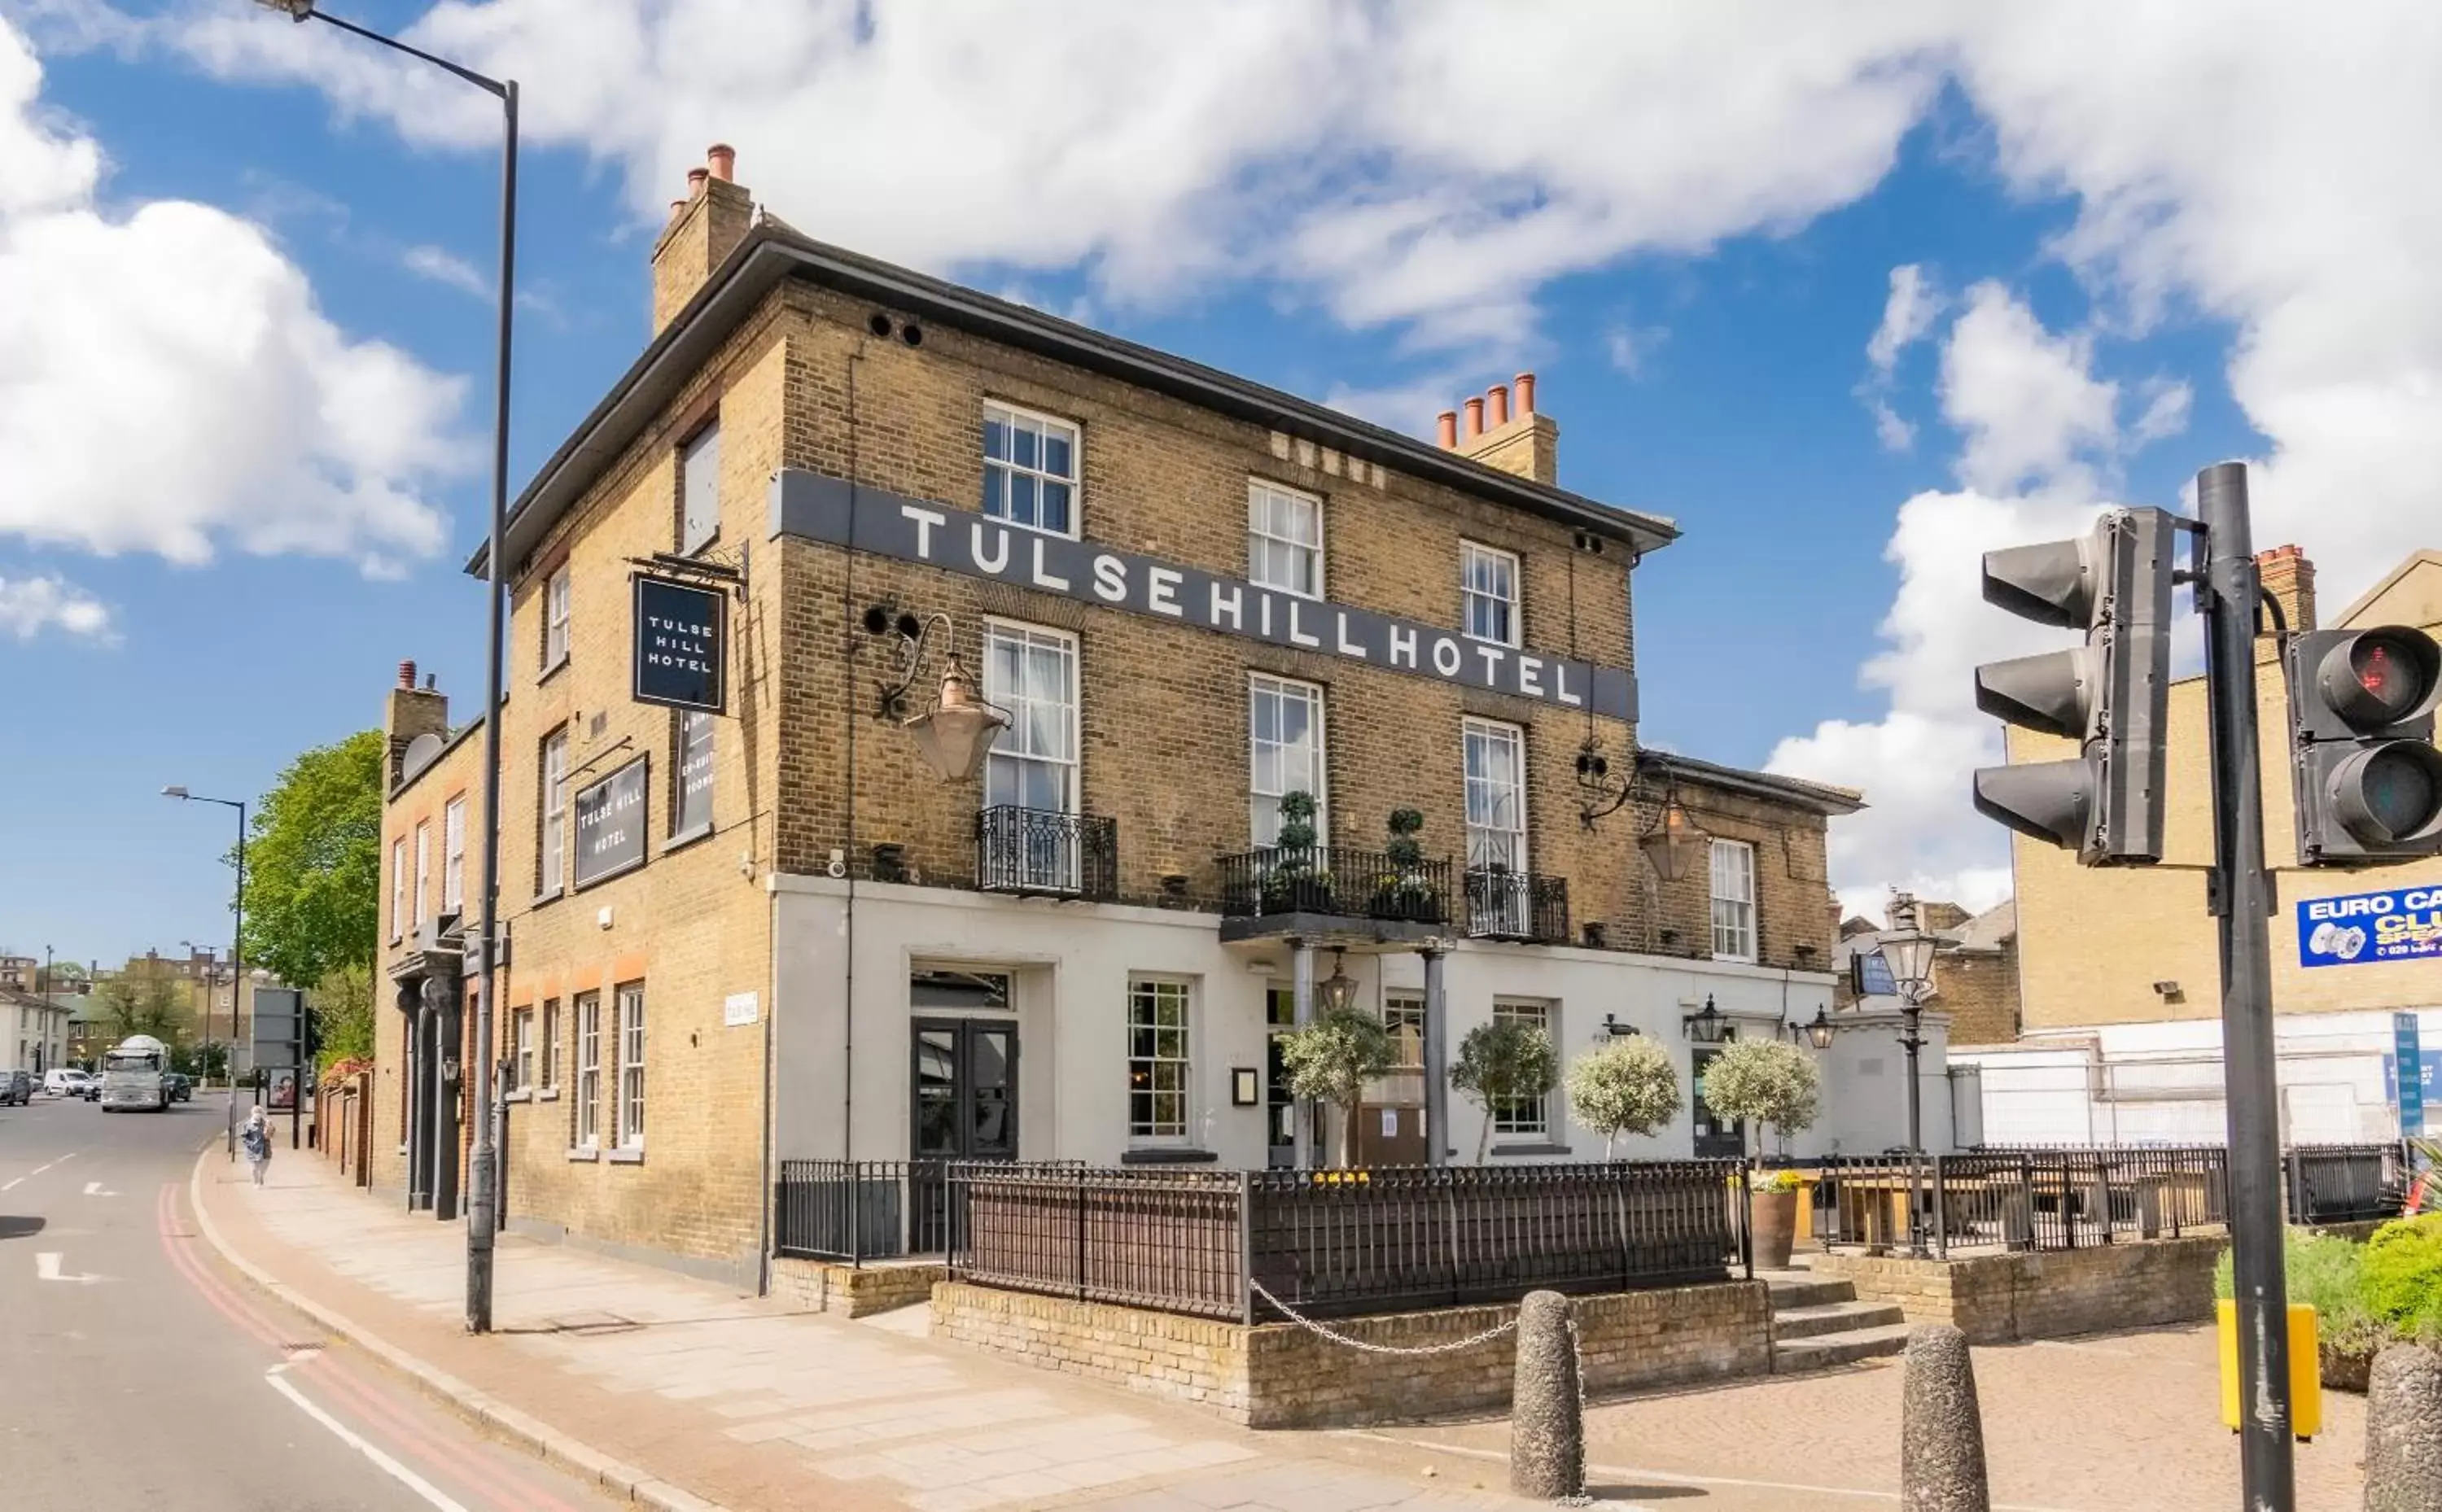 Property building in Tulse Hill Hotel